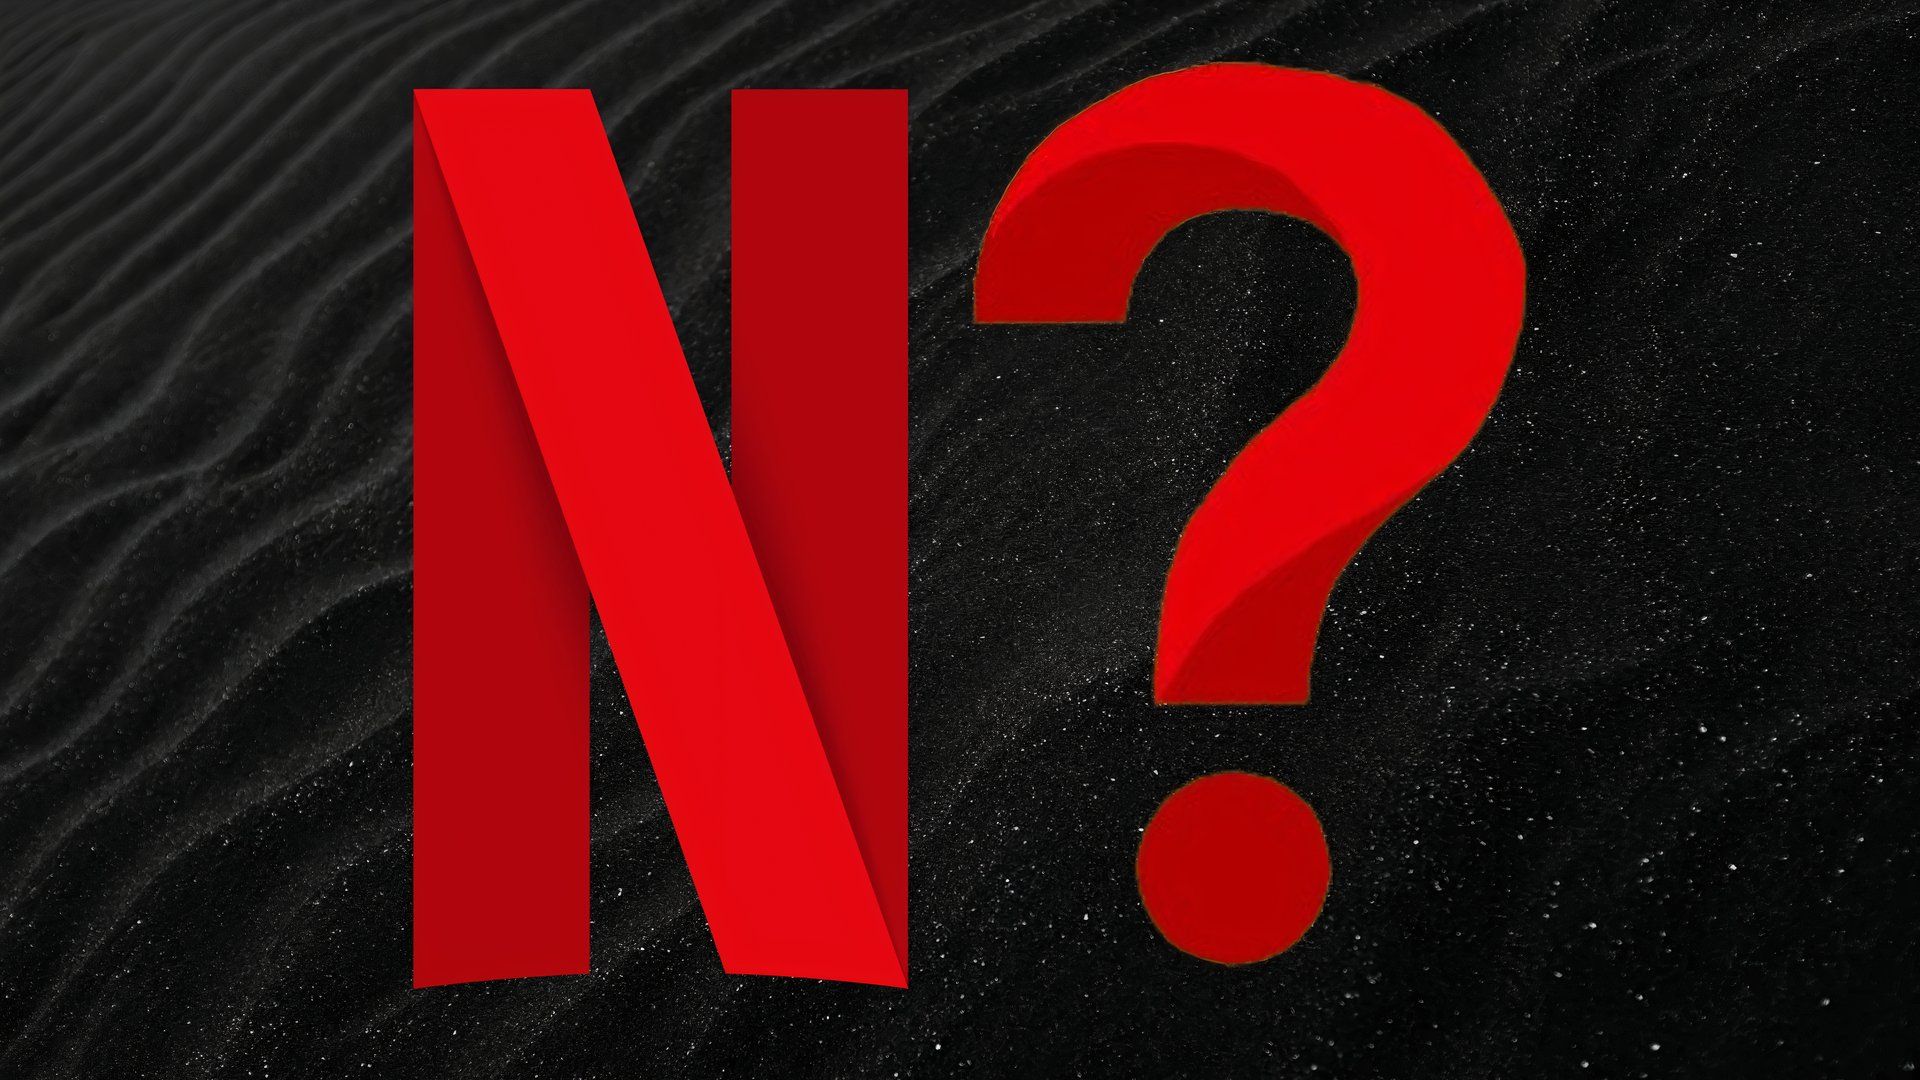 The Netflix symbol N and a red question mark over black sand dunes